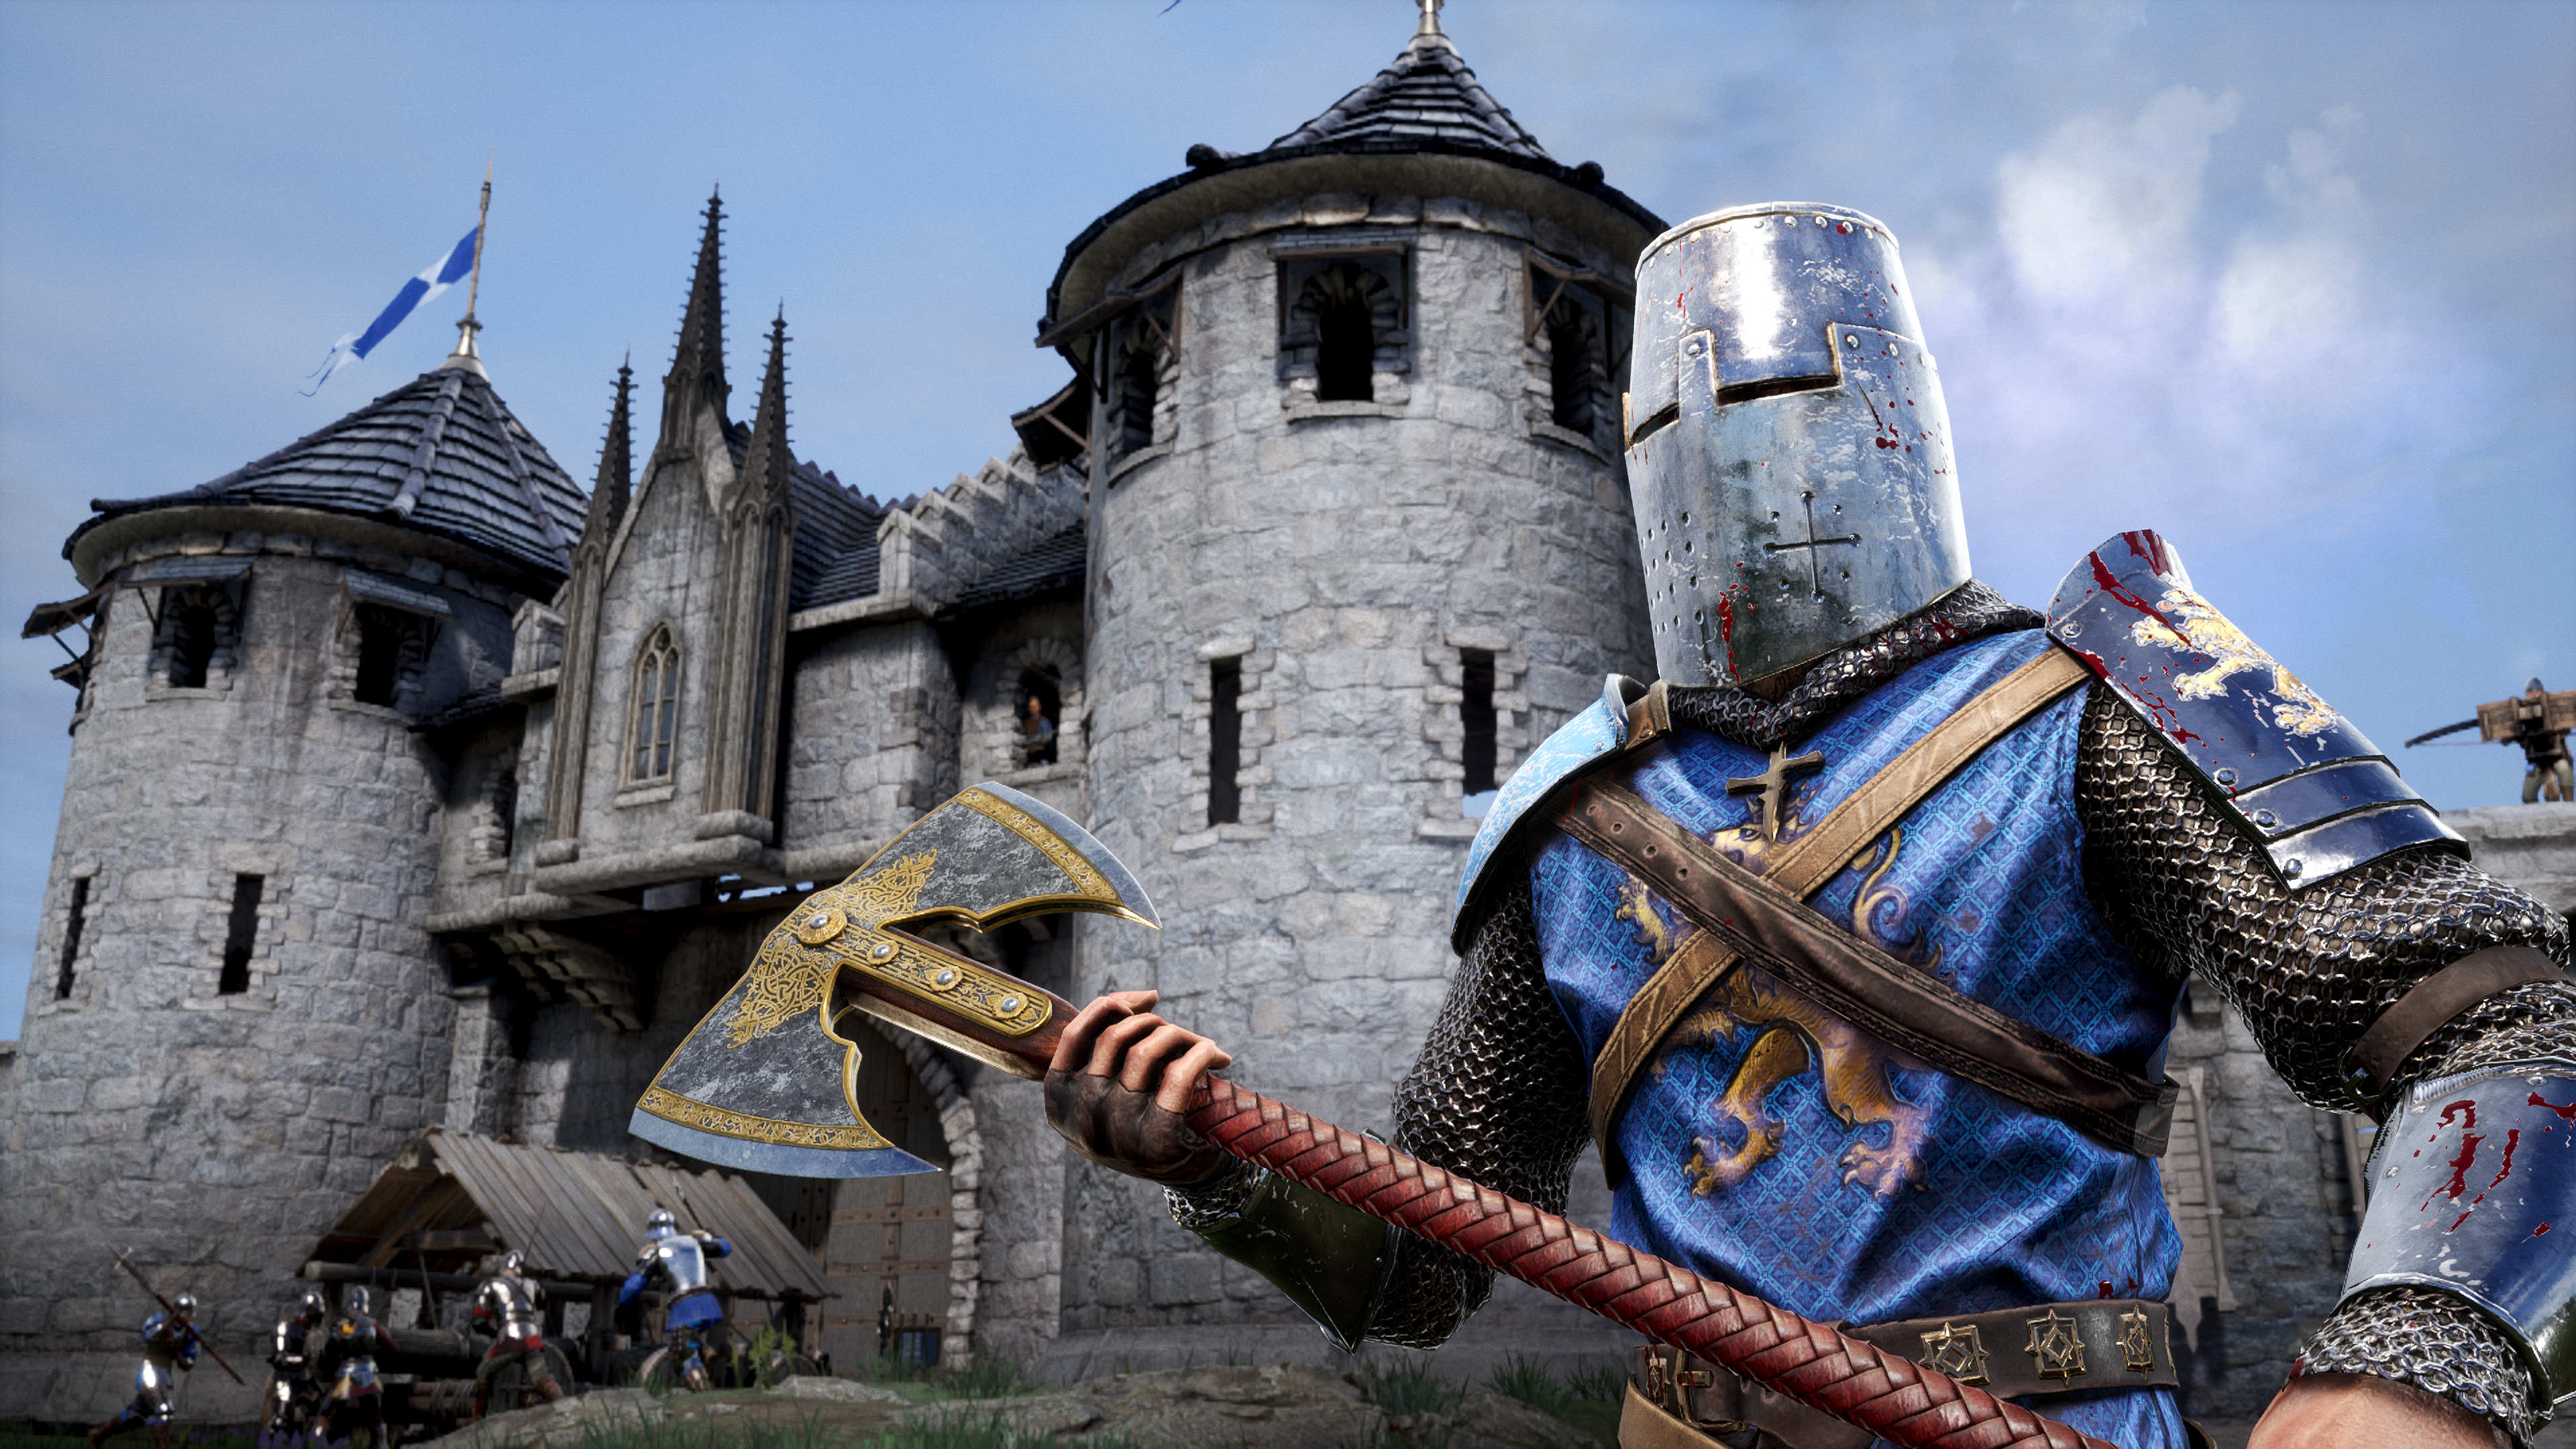 download chivalry 2 price for free